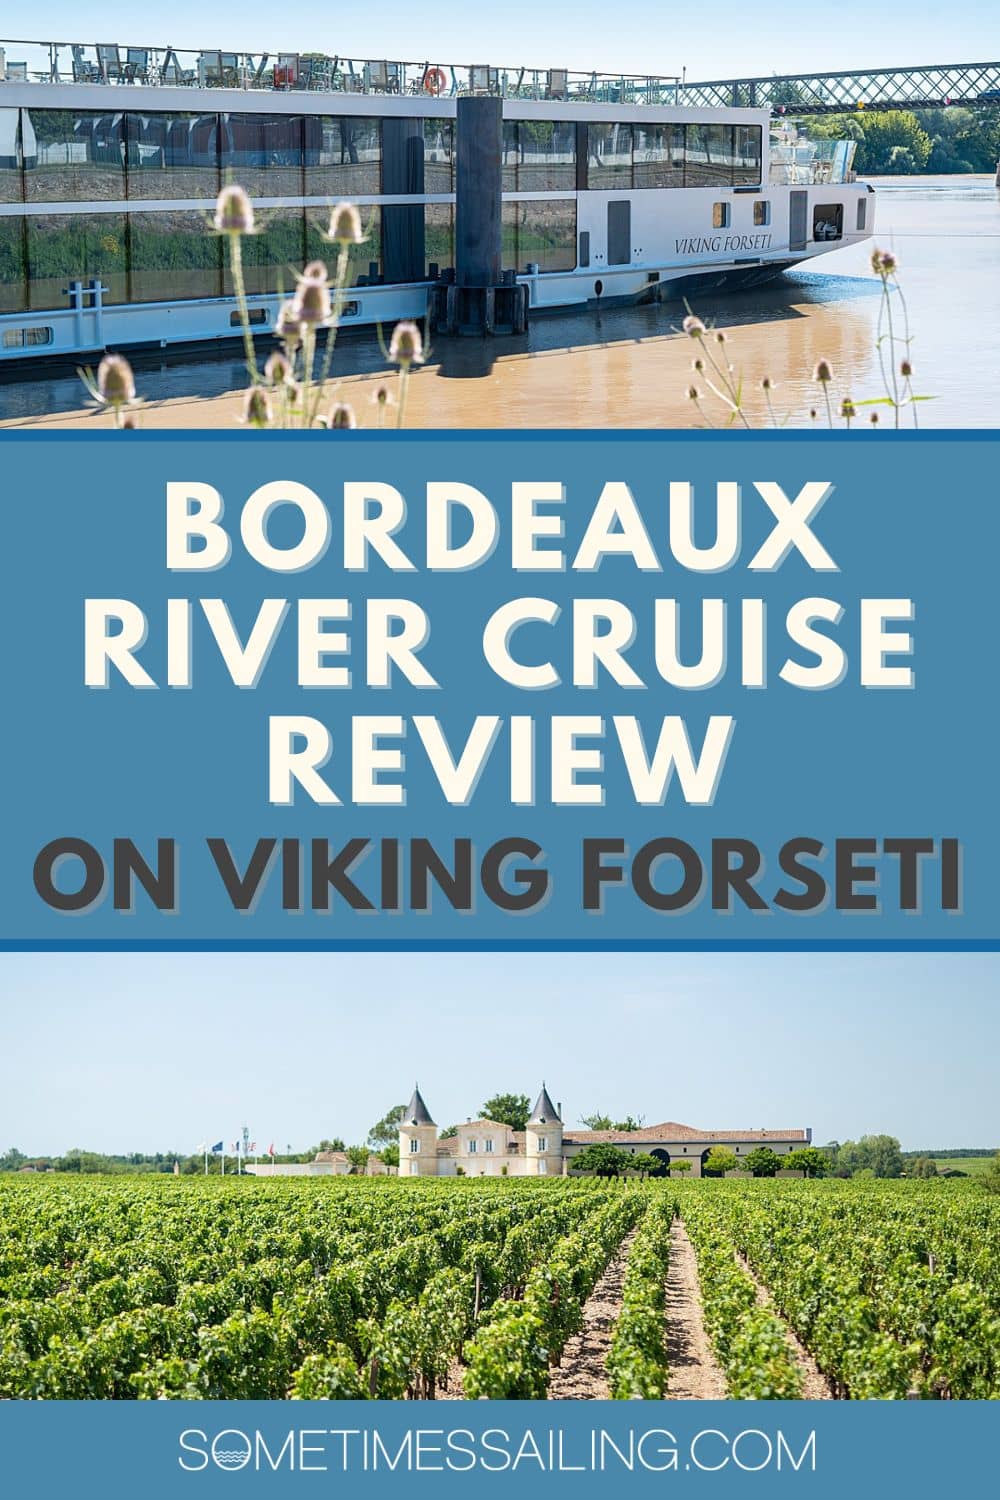 Bordeaux River Cruise review with two photos from the experience.